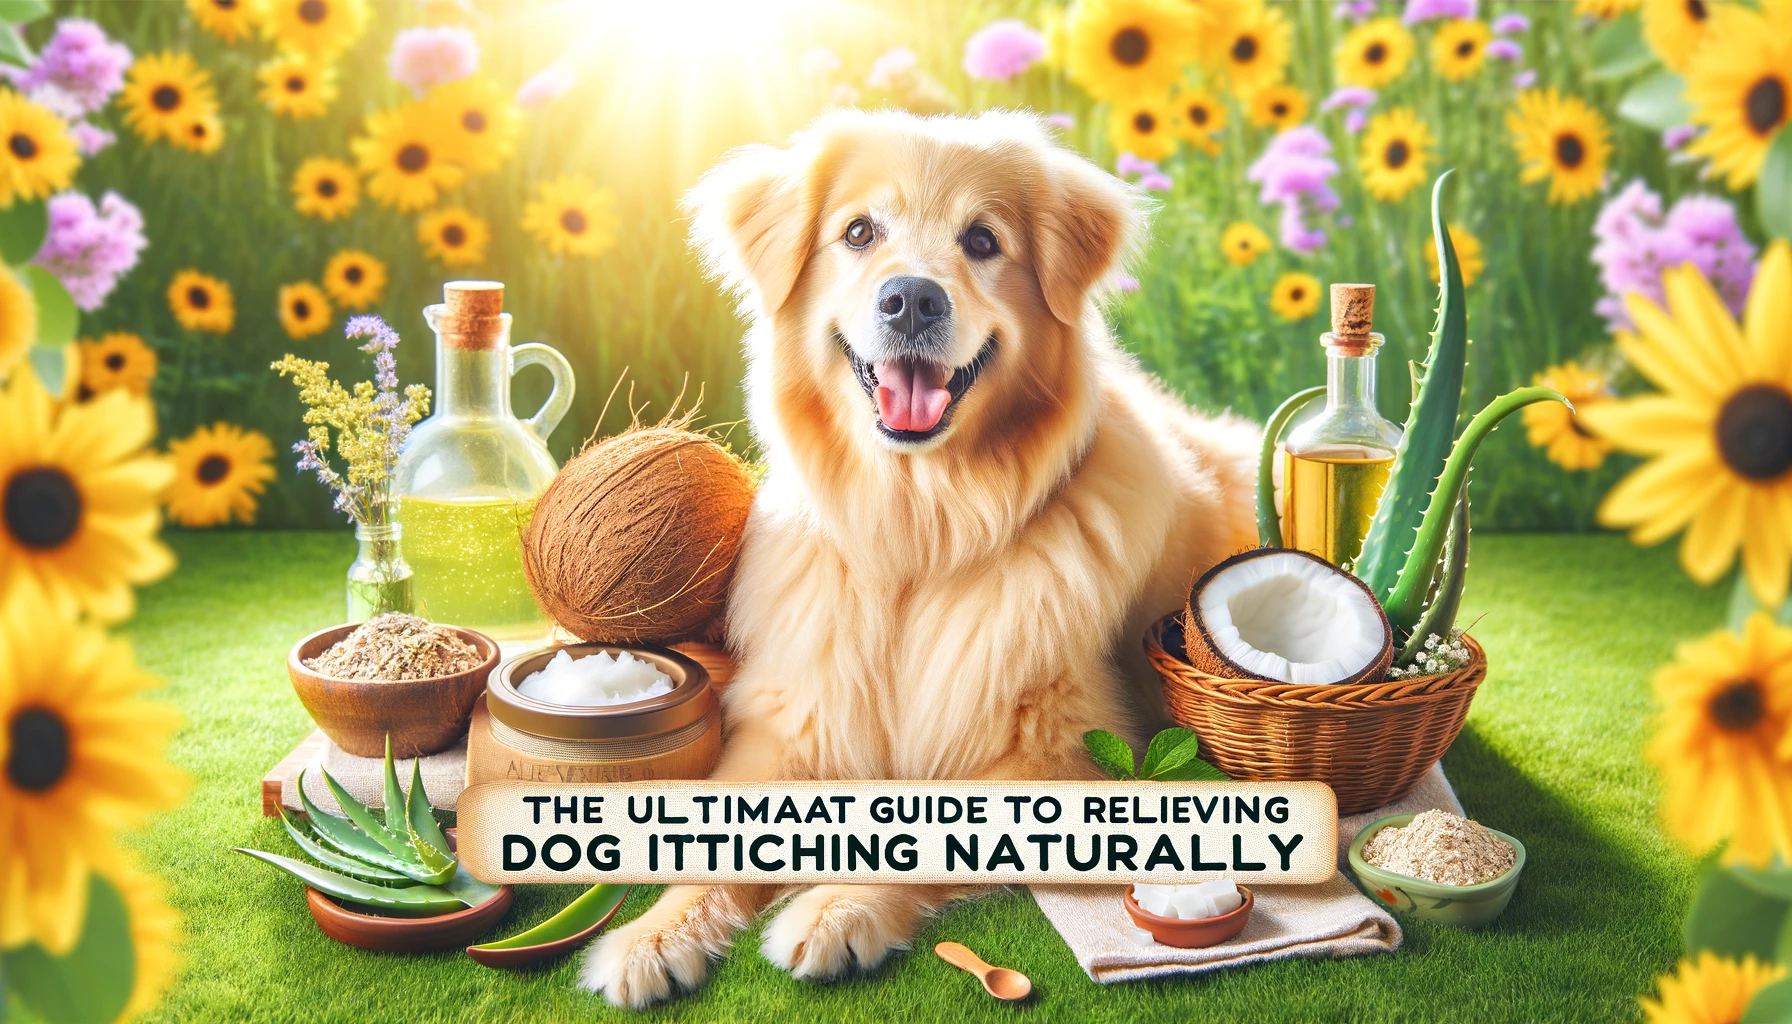 The Ultimate Guide to Relieving Dog Itching Naturally